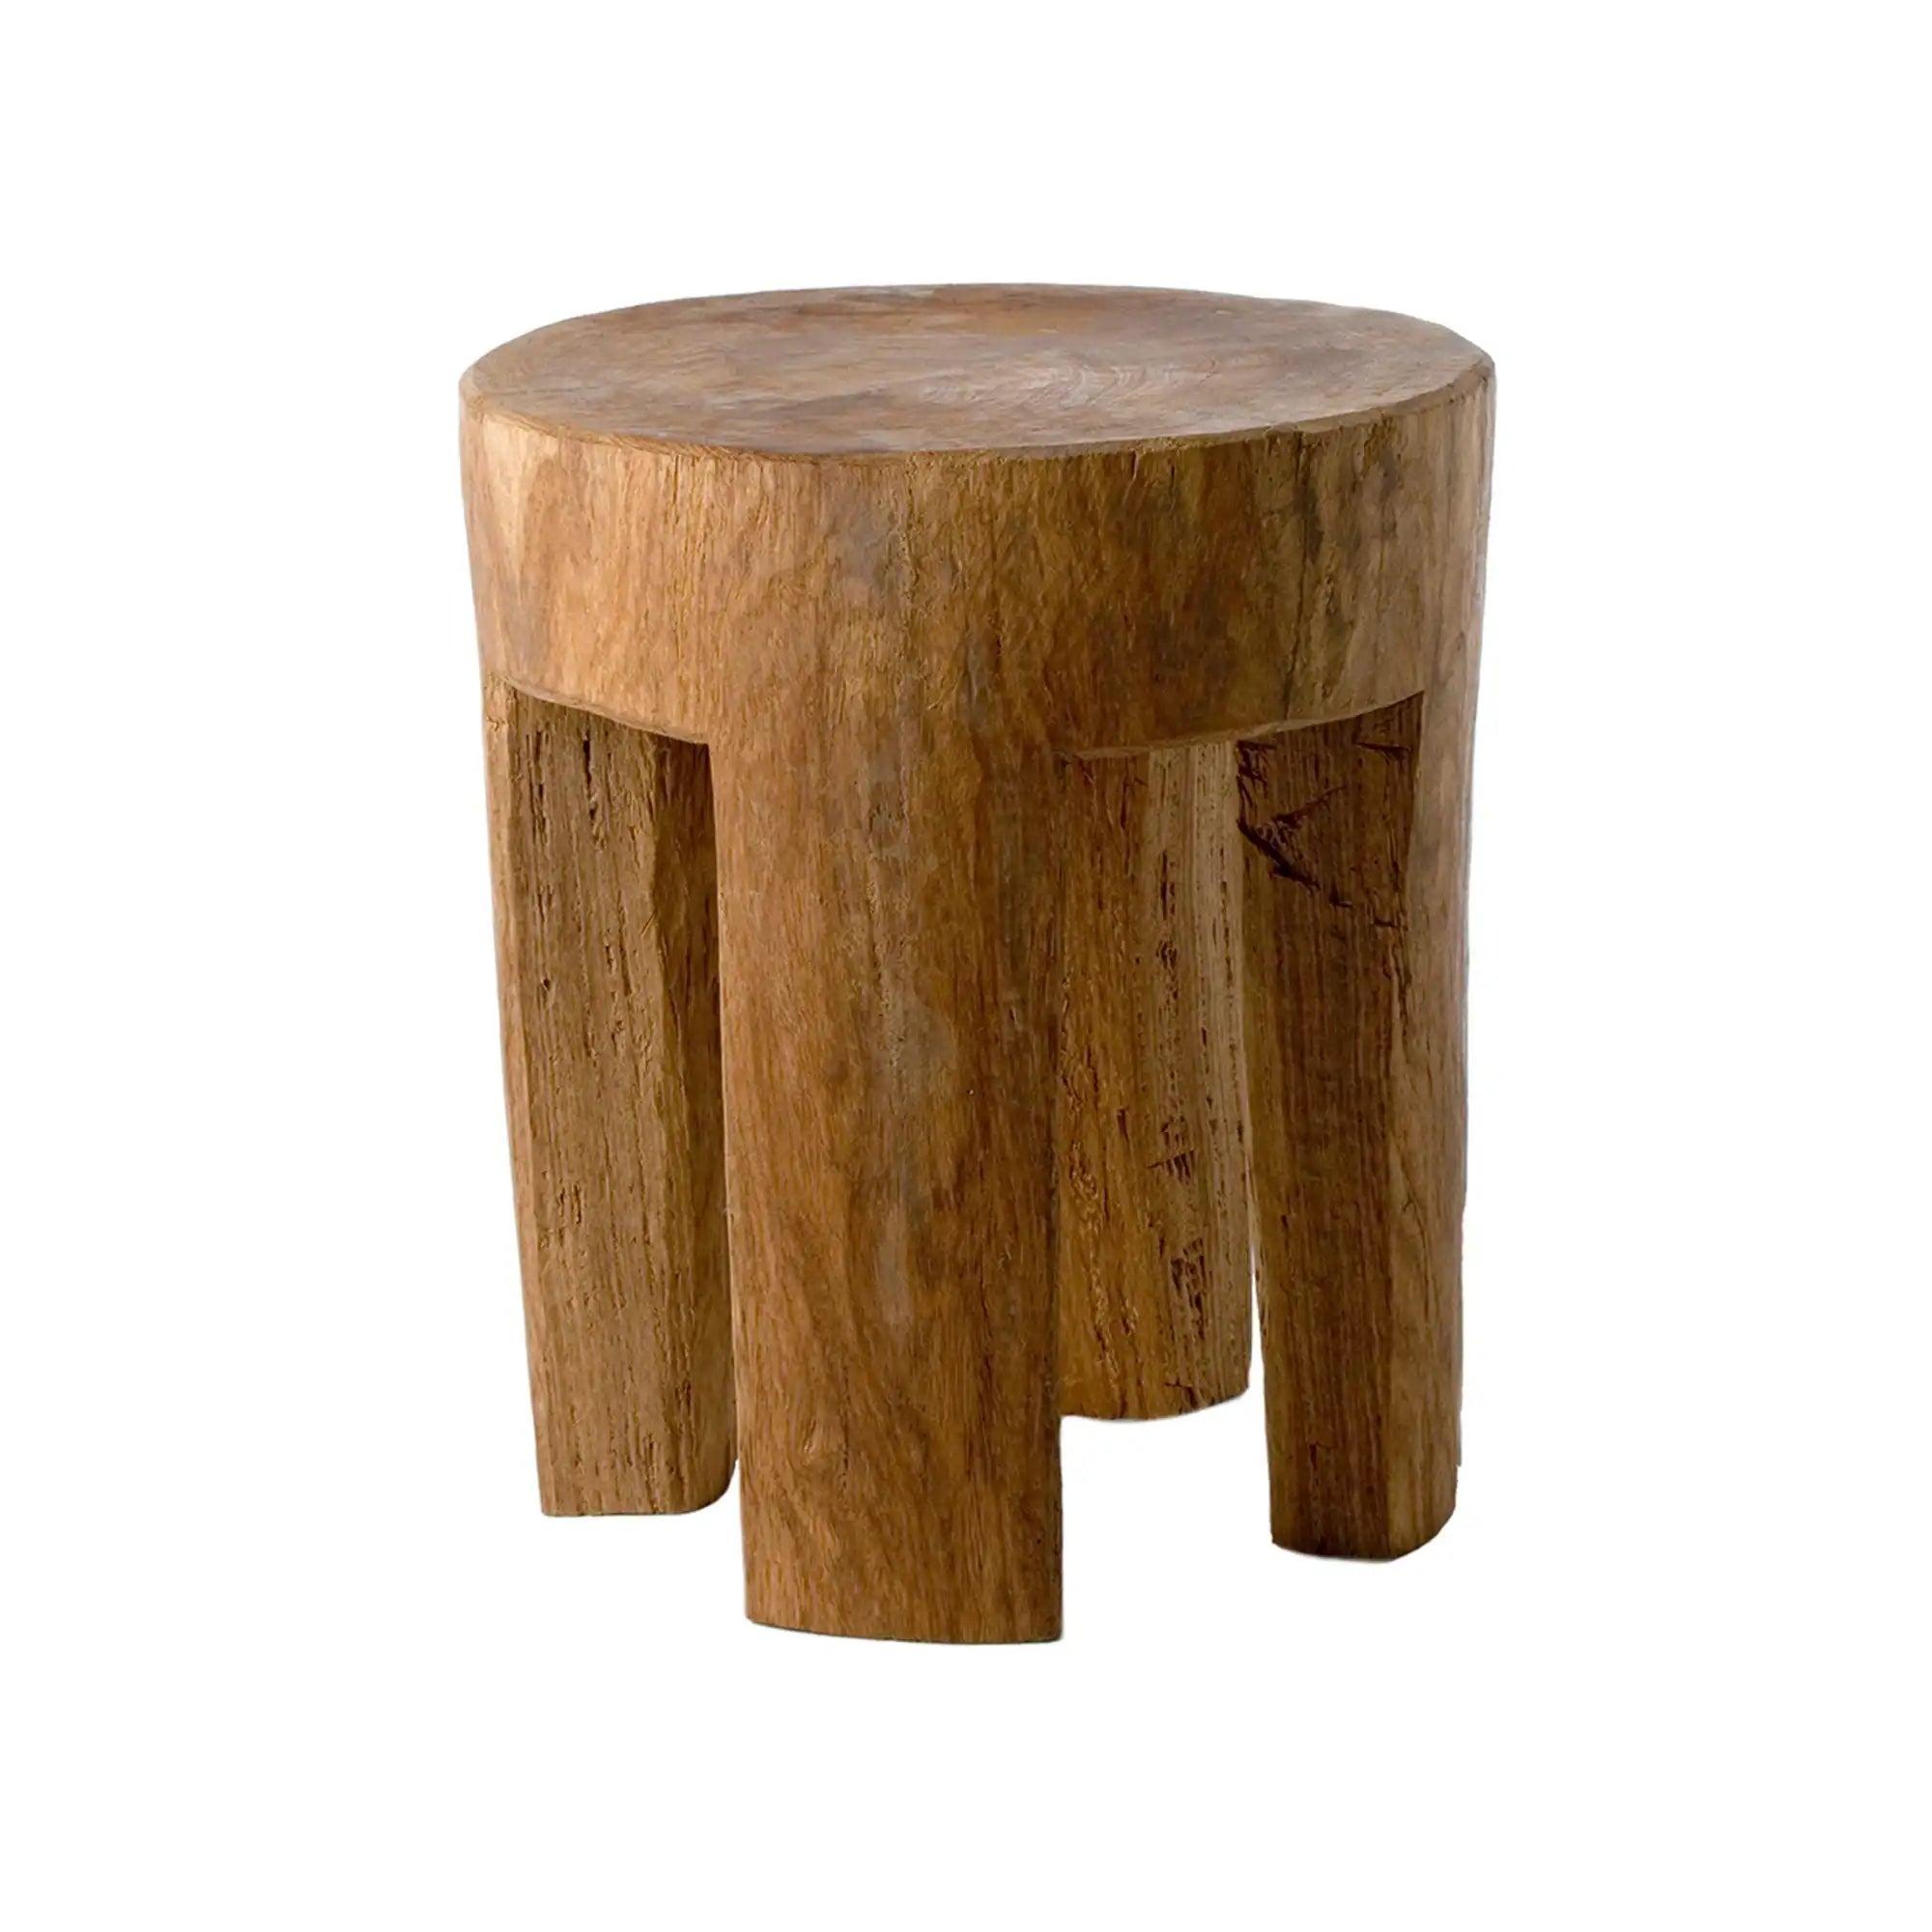 Round Four Square Legs Stool - THAT COOL LIVING